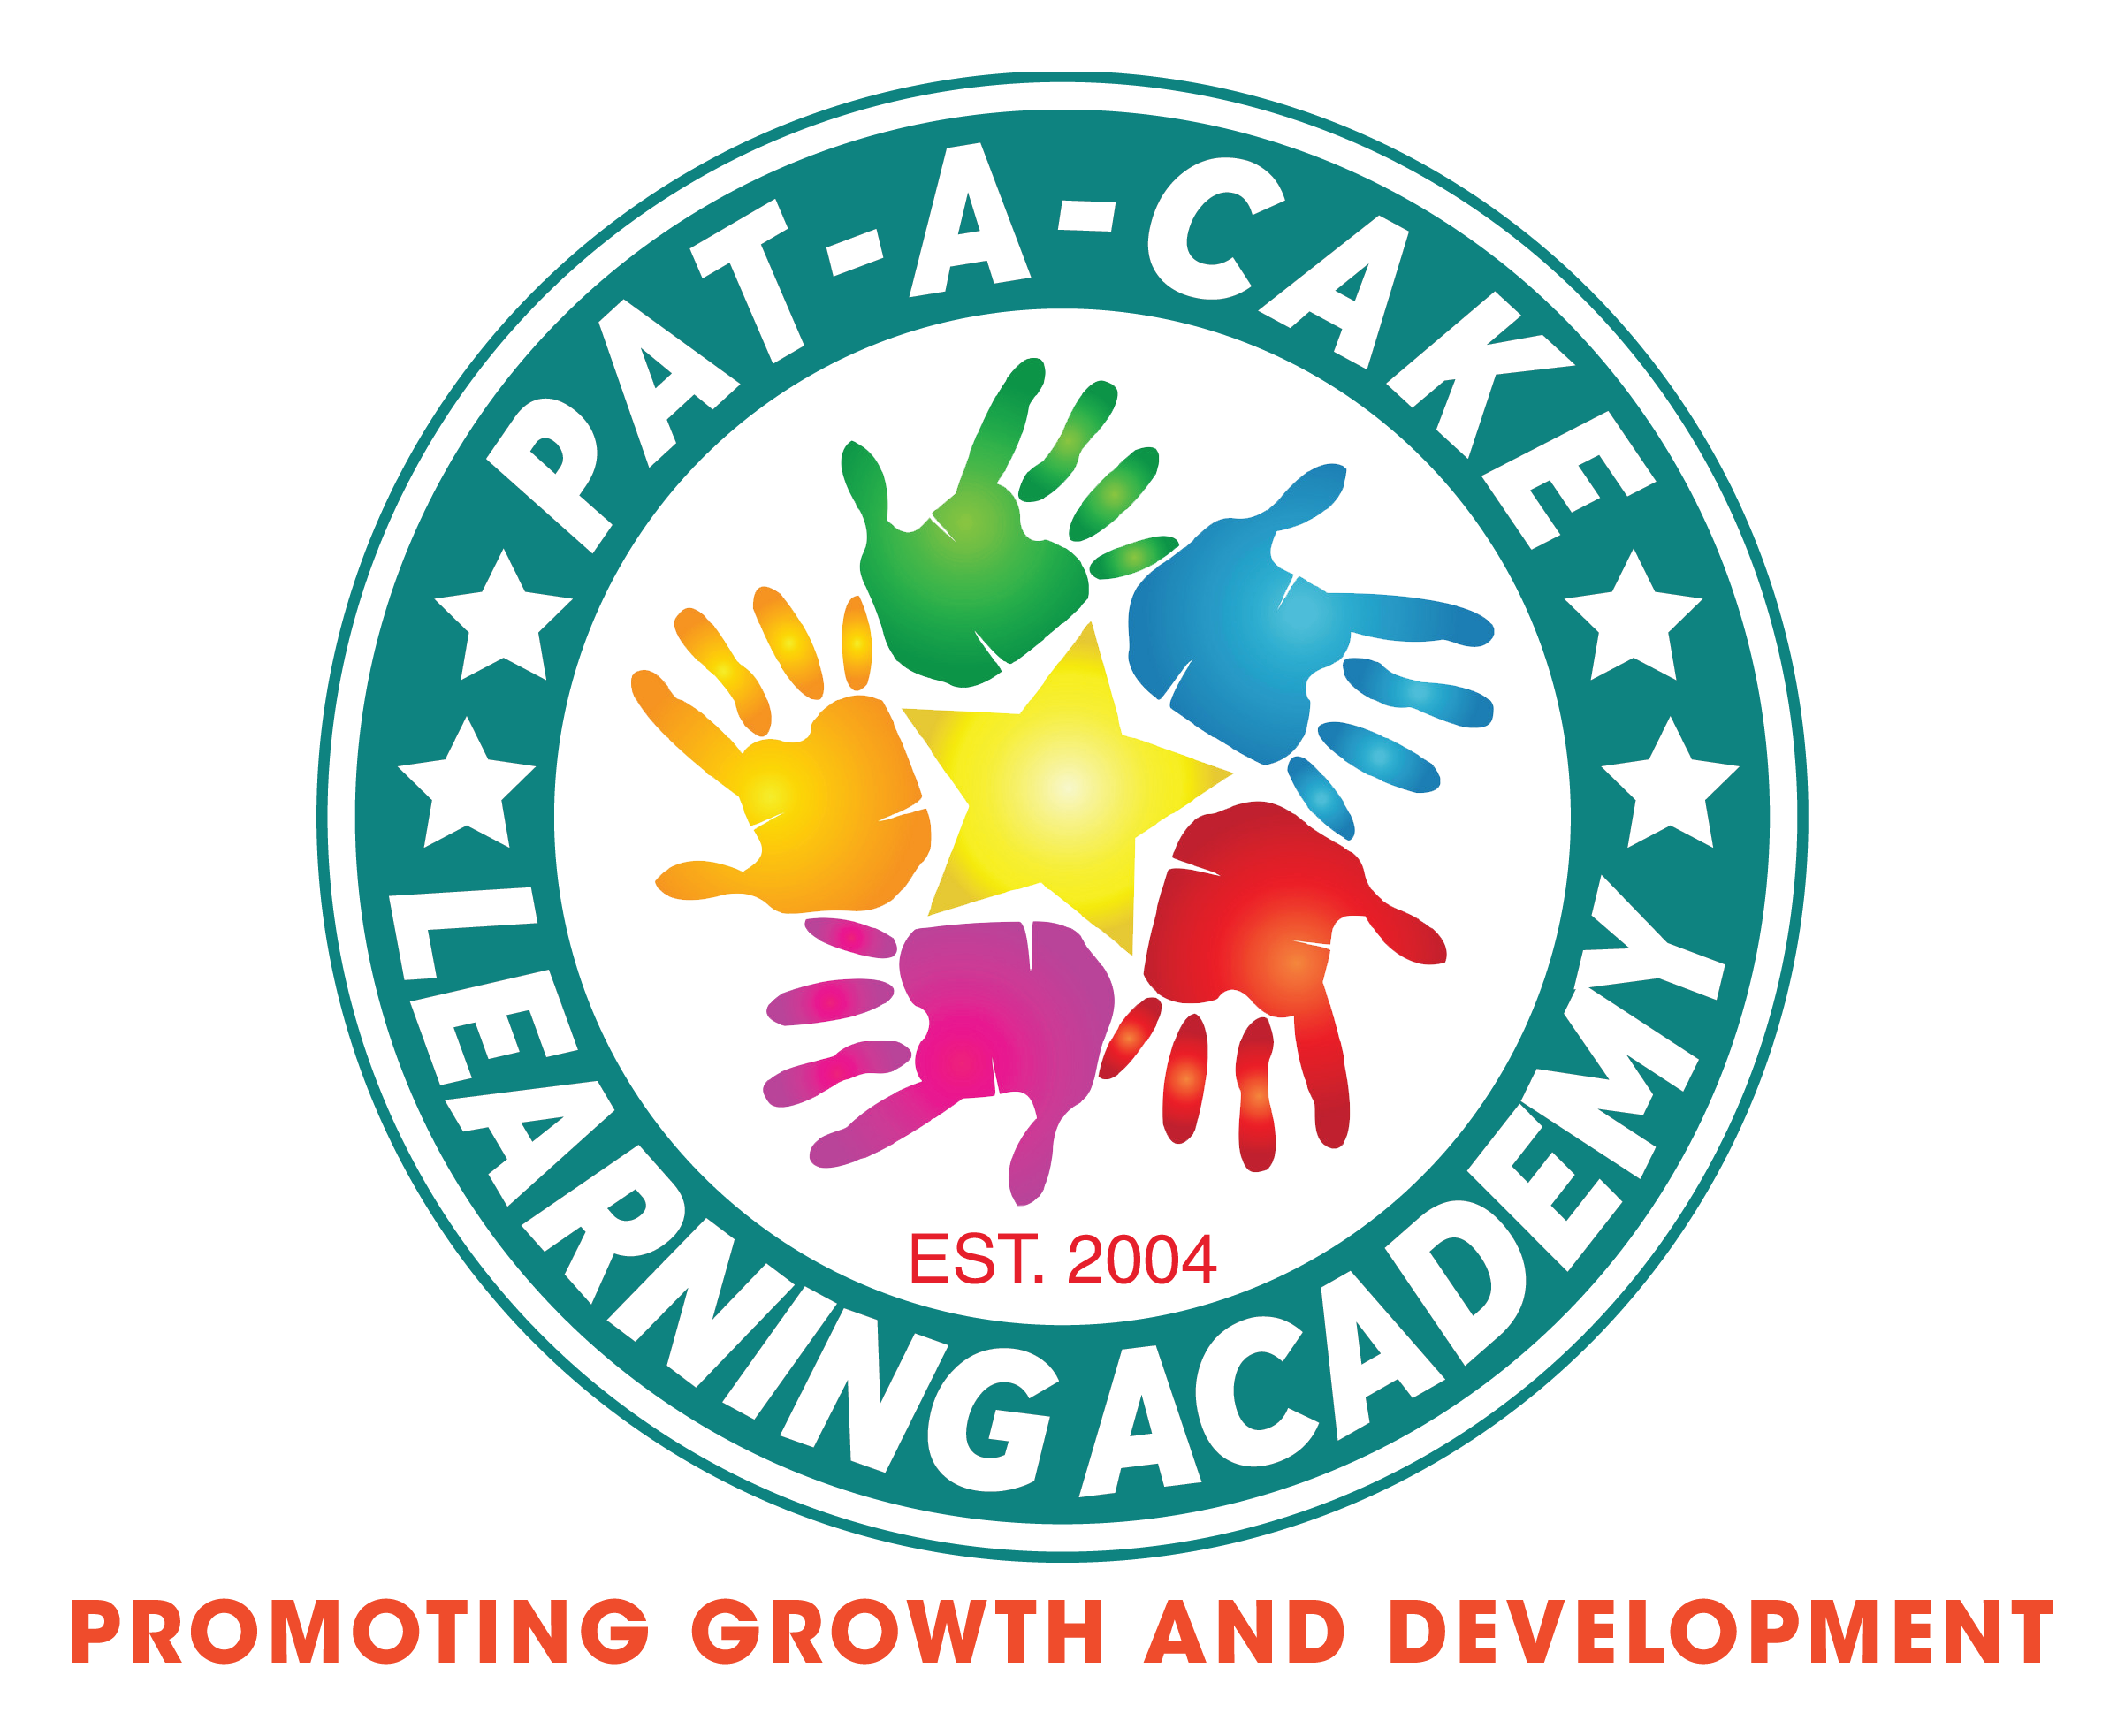 Pat-A-Cake Learning Academy